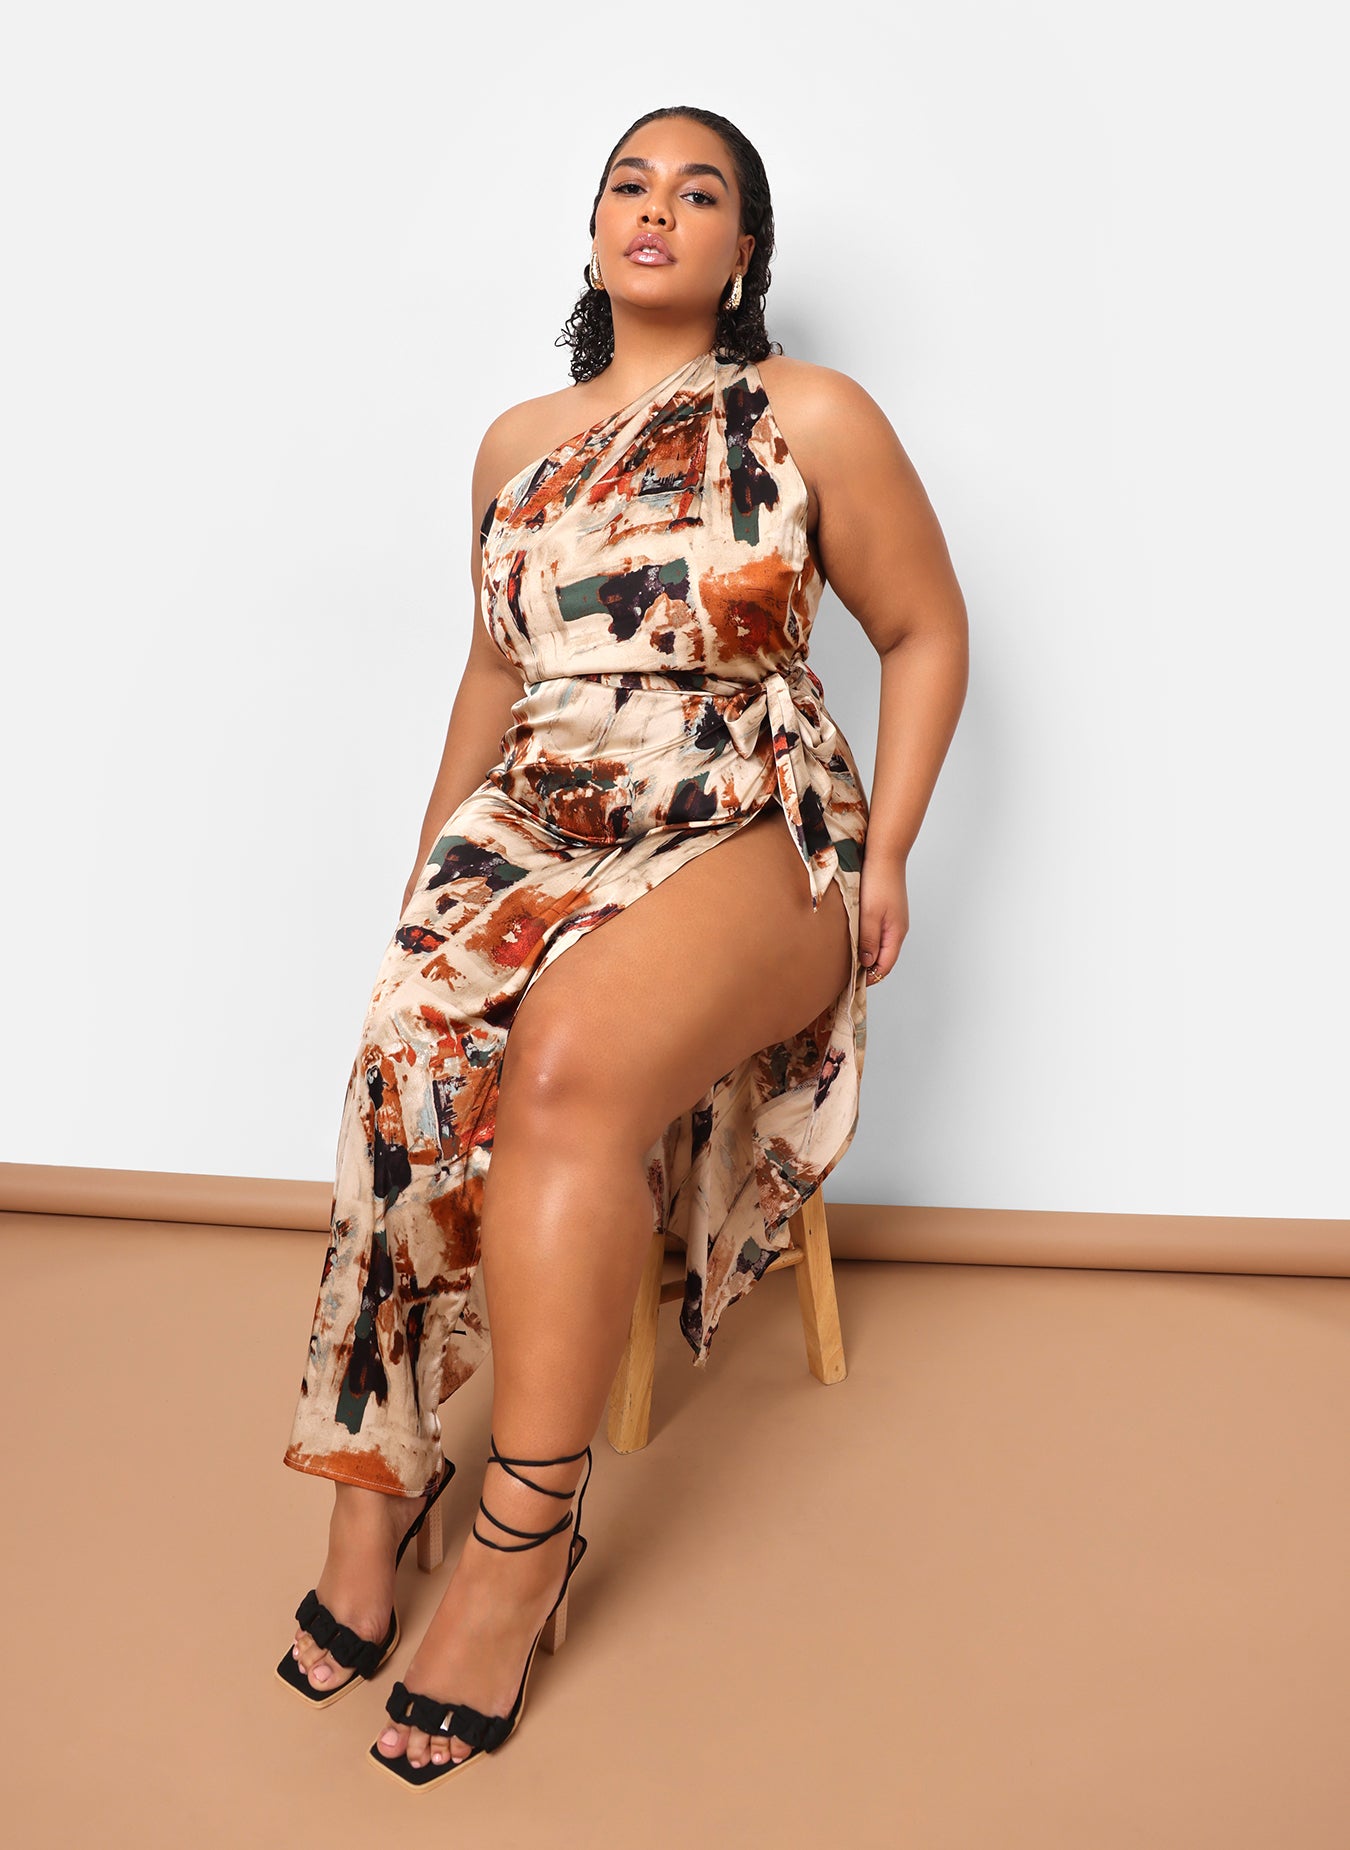 Halter Lined Plus Size Summer Dress in Bamboo White